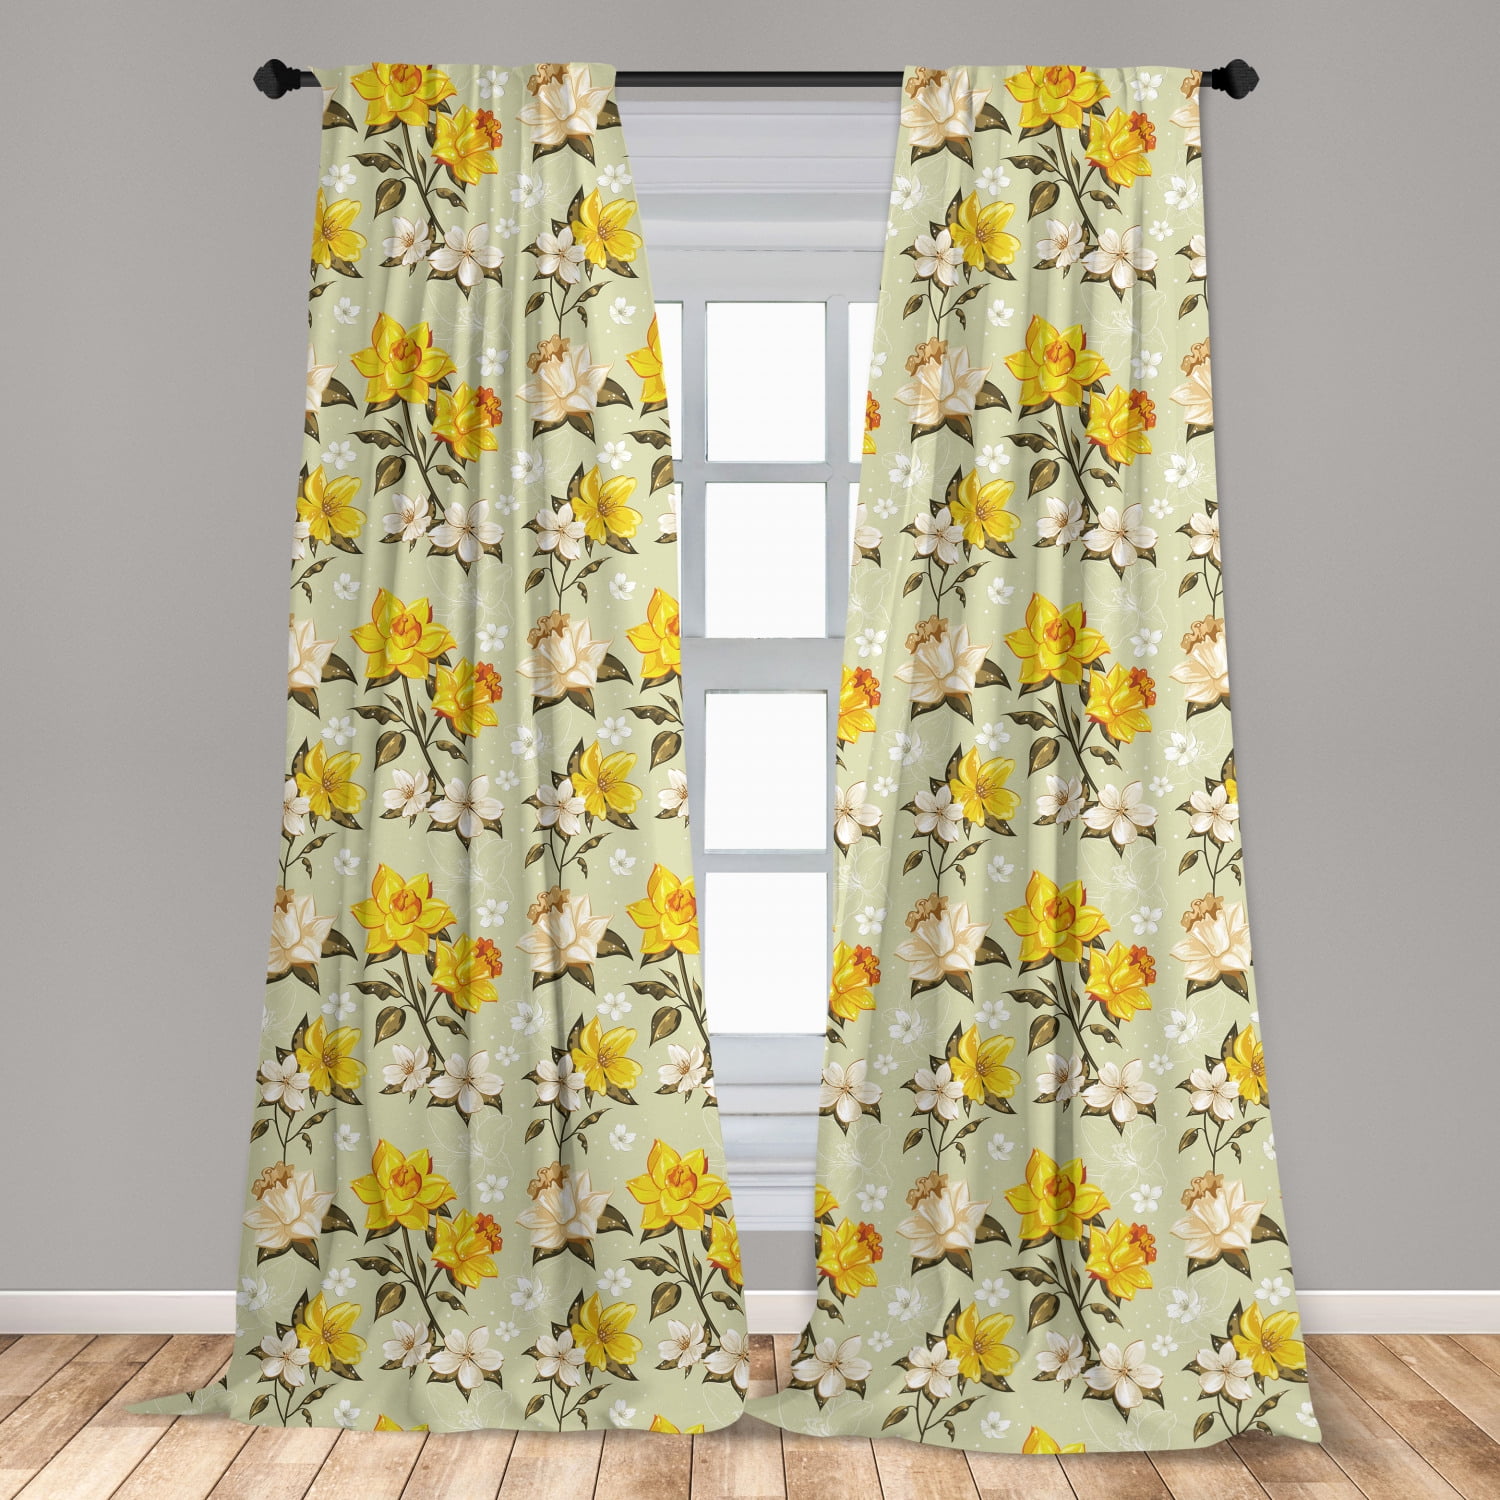 Narcissus Black Stone 3D Blockout Photo Printing Curtains Draps Fabric Window 